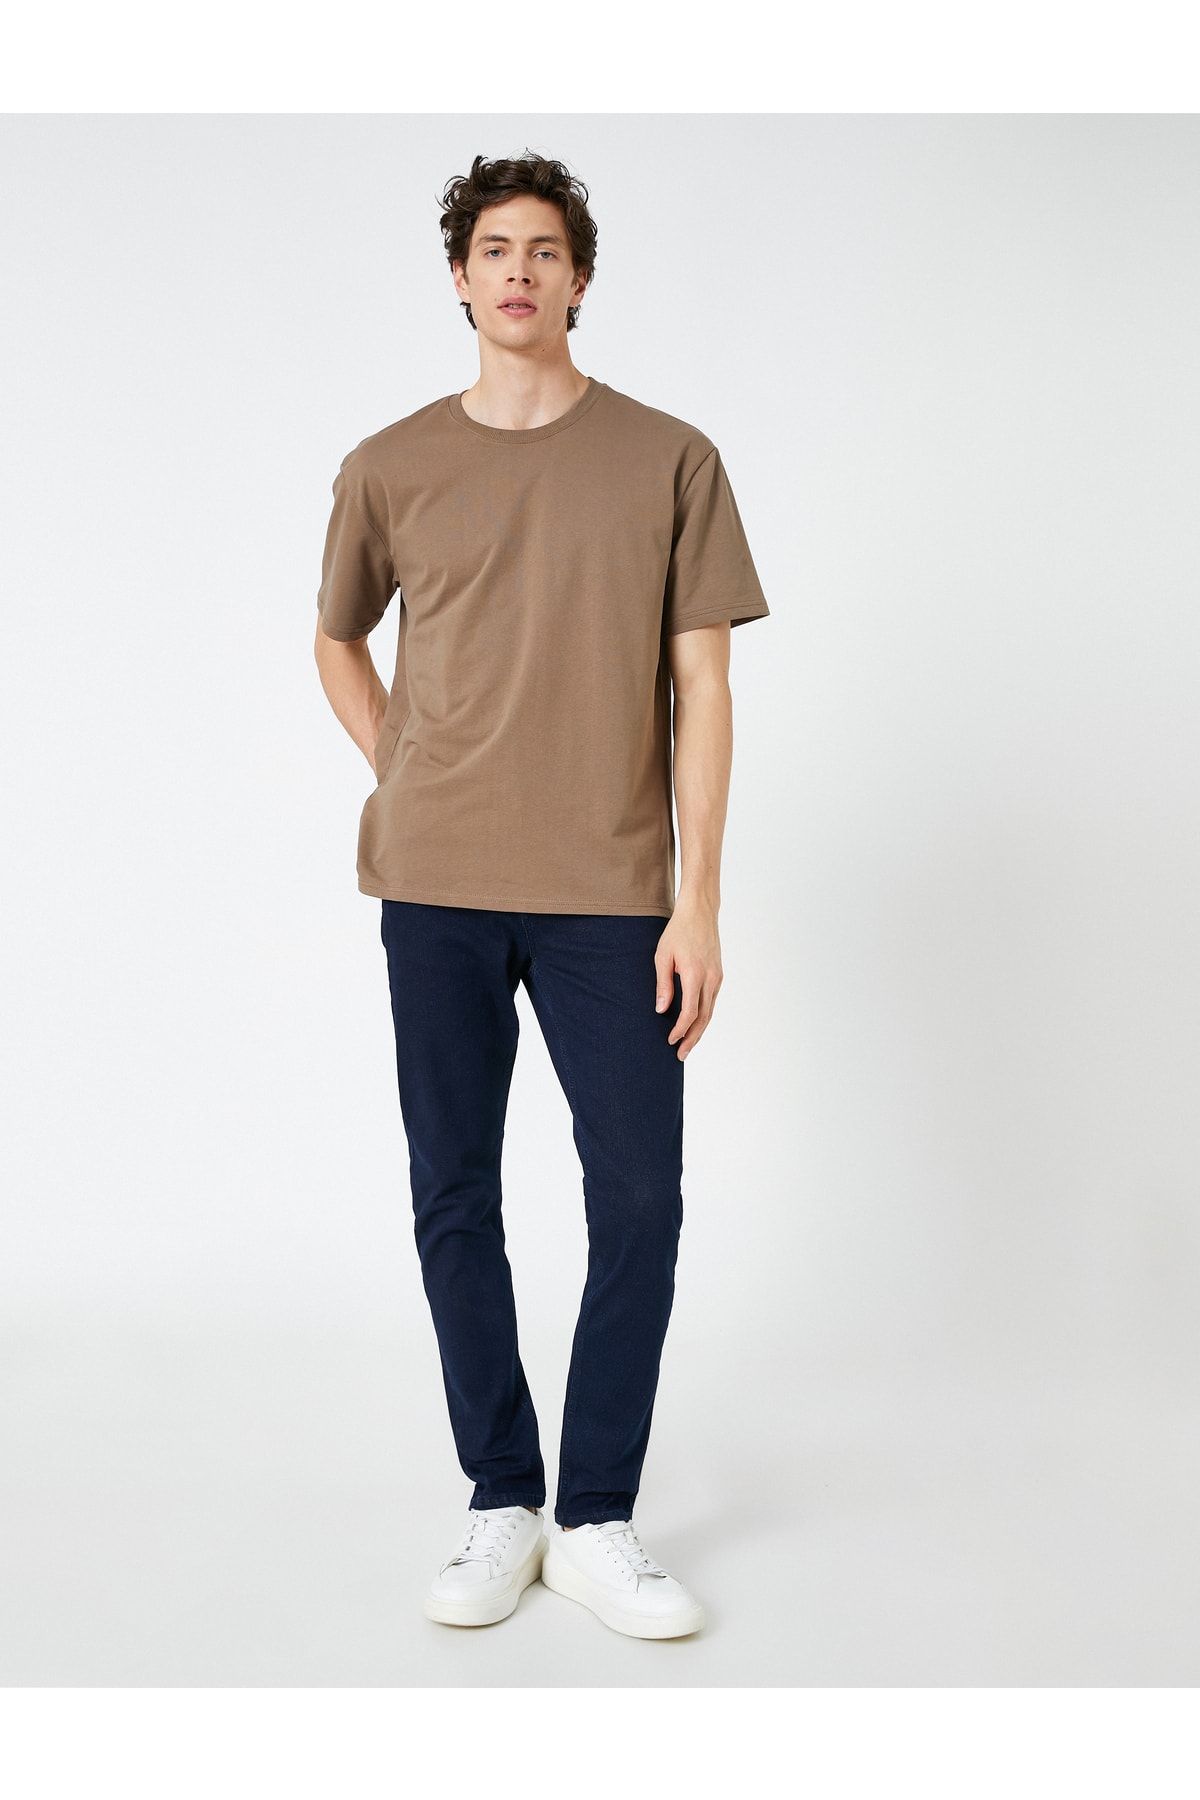 Koton Slim Fit Jeans Trousers have Pockets and Buttons